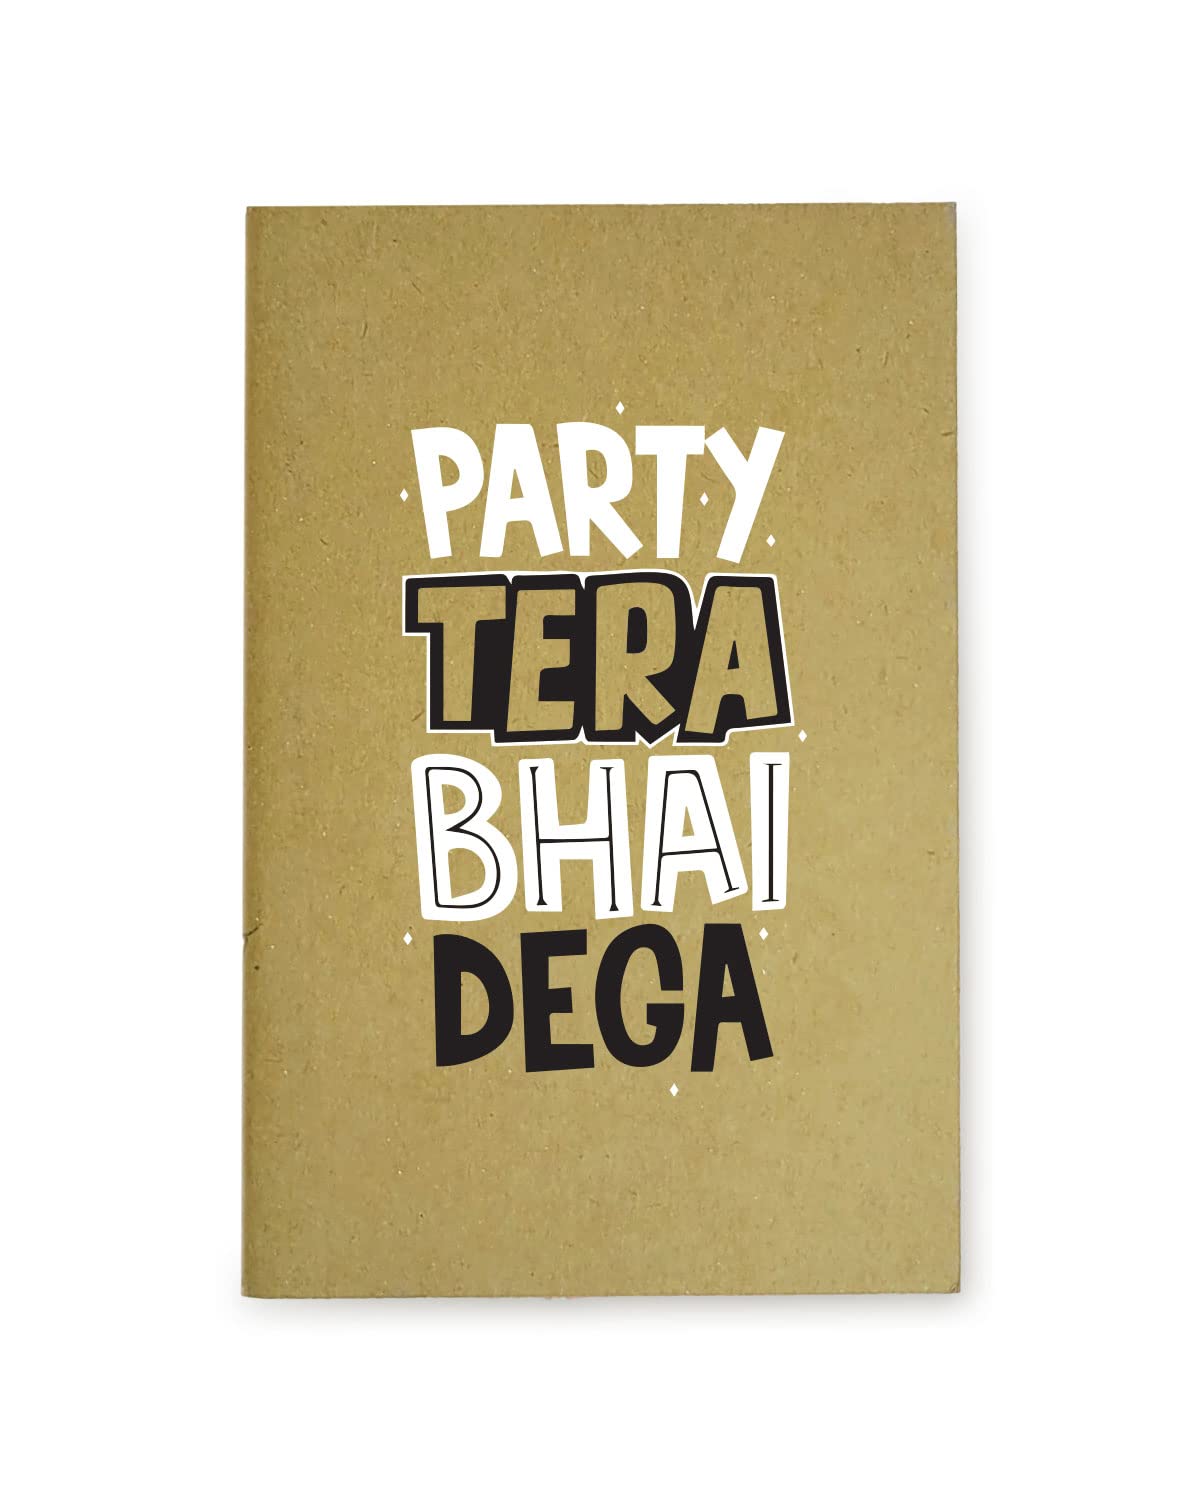 Party Tera Bhai Dega - Brown A5 Doodle Notebook - Kraft Cover Notebook - A5 - 300 GSM Kraft Cover - Handmade - Unruled - 80 Pages - Natural Shade Pages 120 GSM - Funny Quotes & Quirky, Funky designs